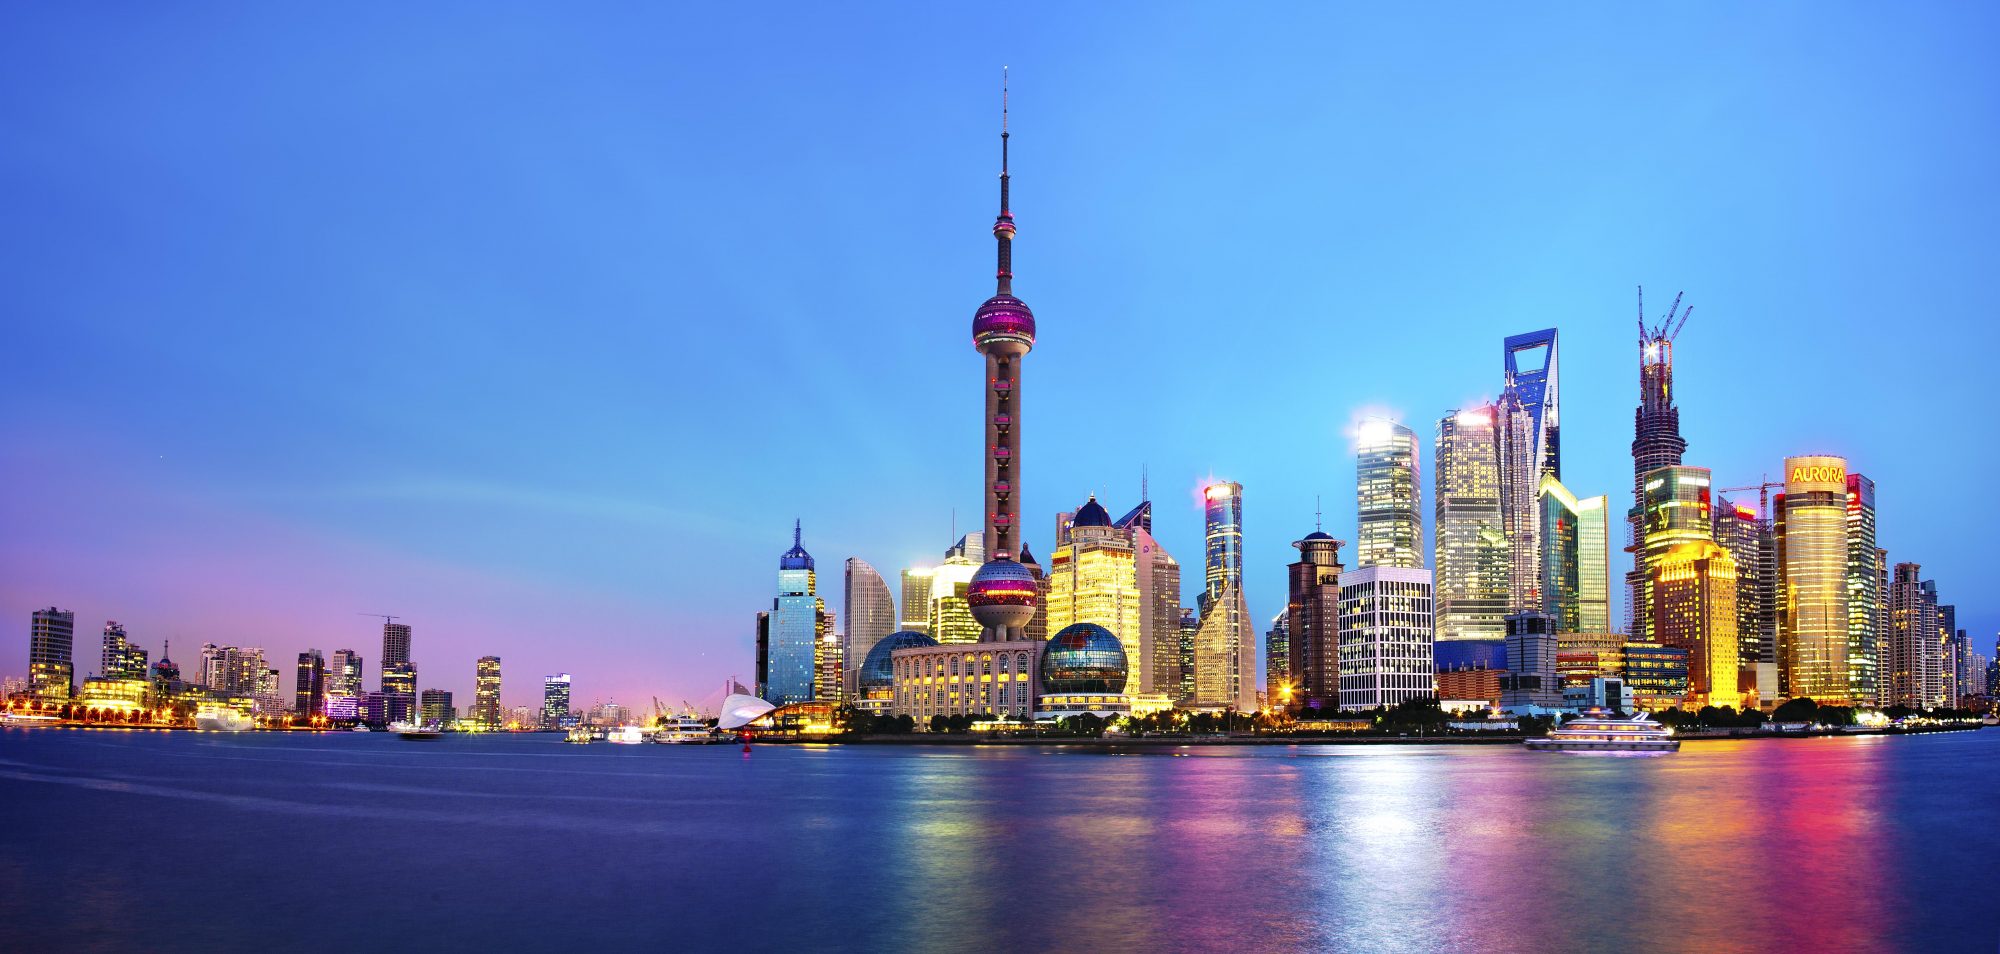 Shanghai most visited cities